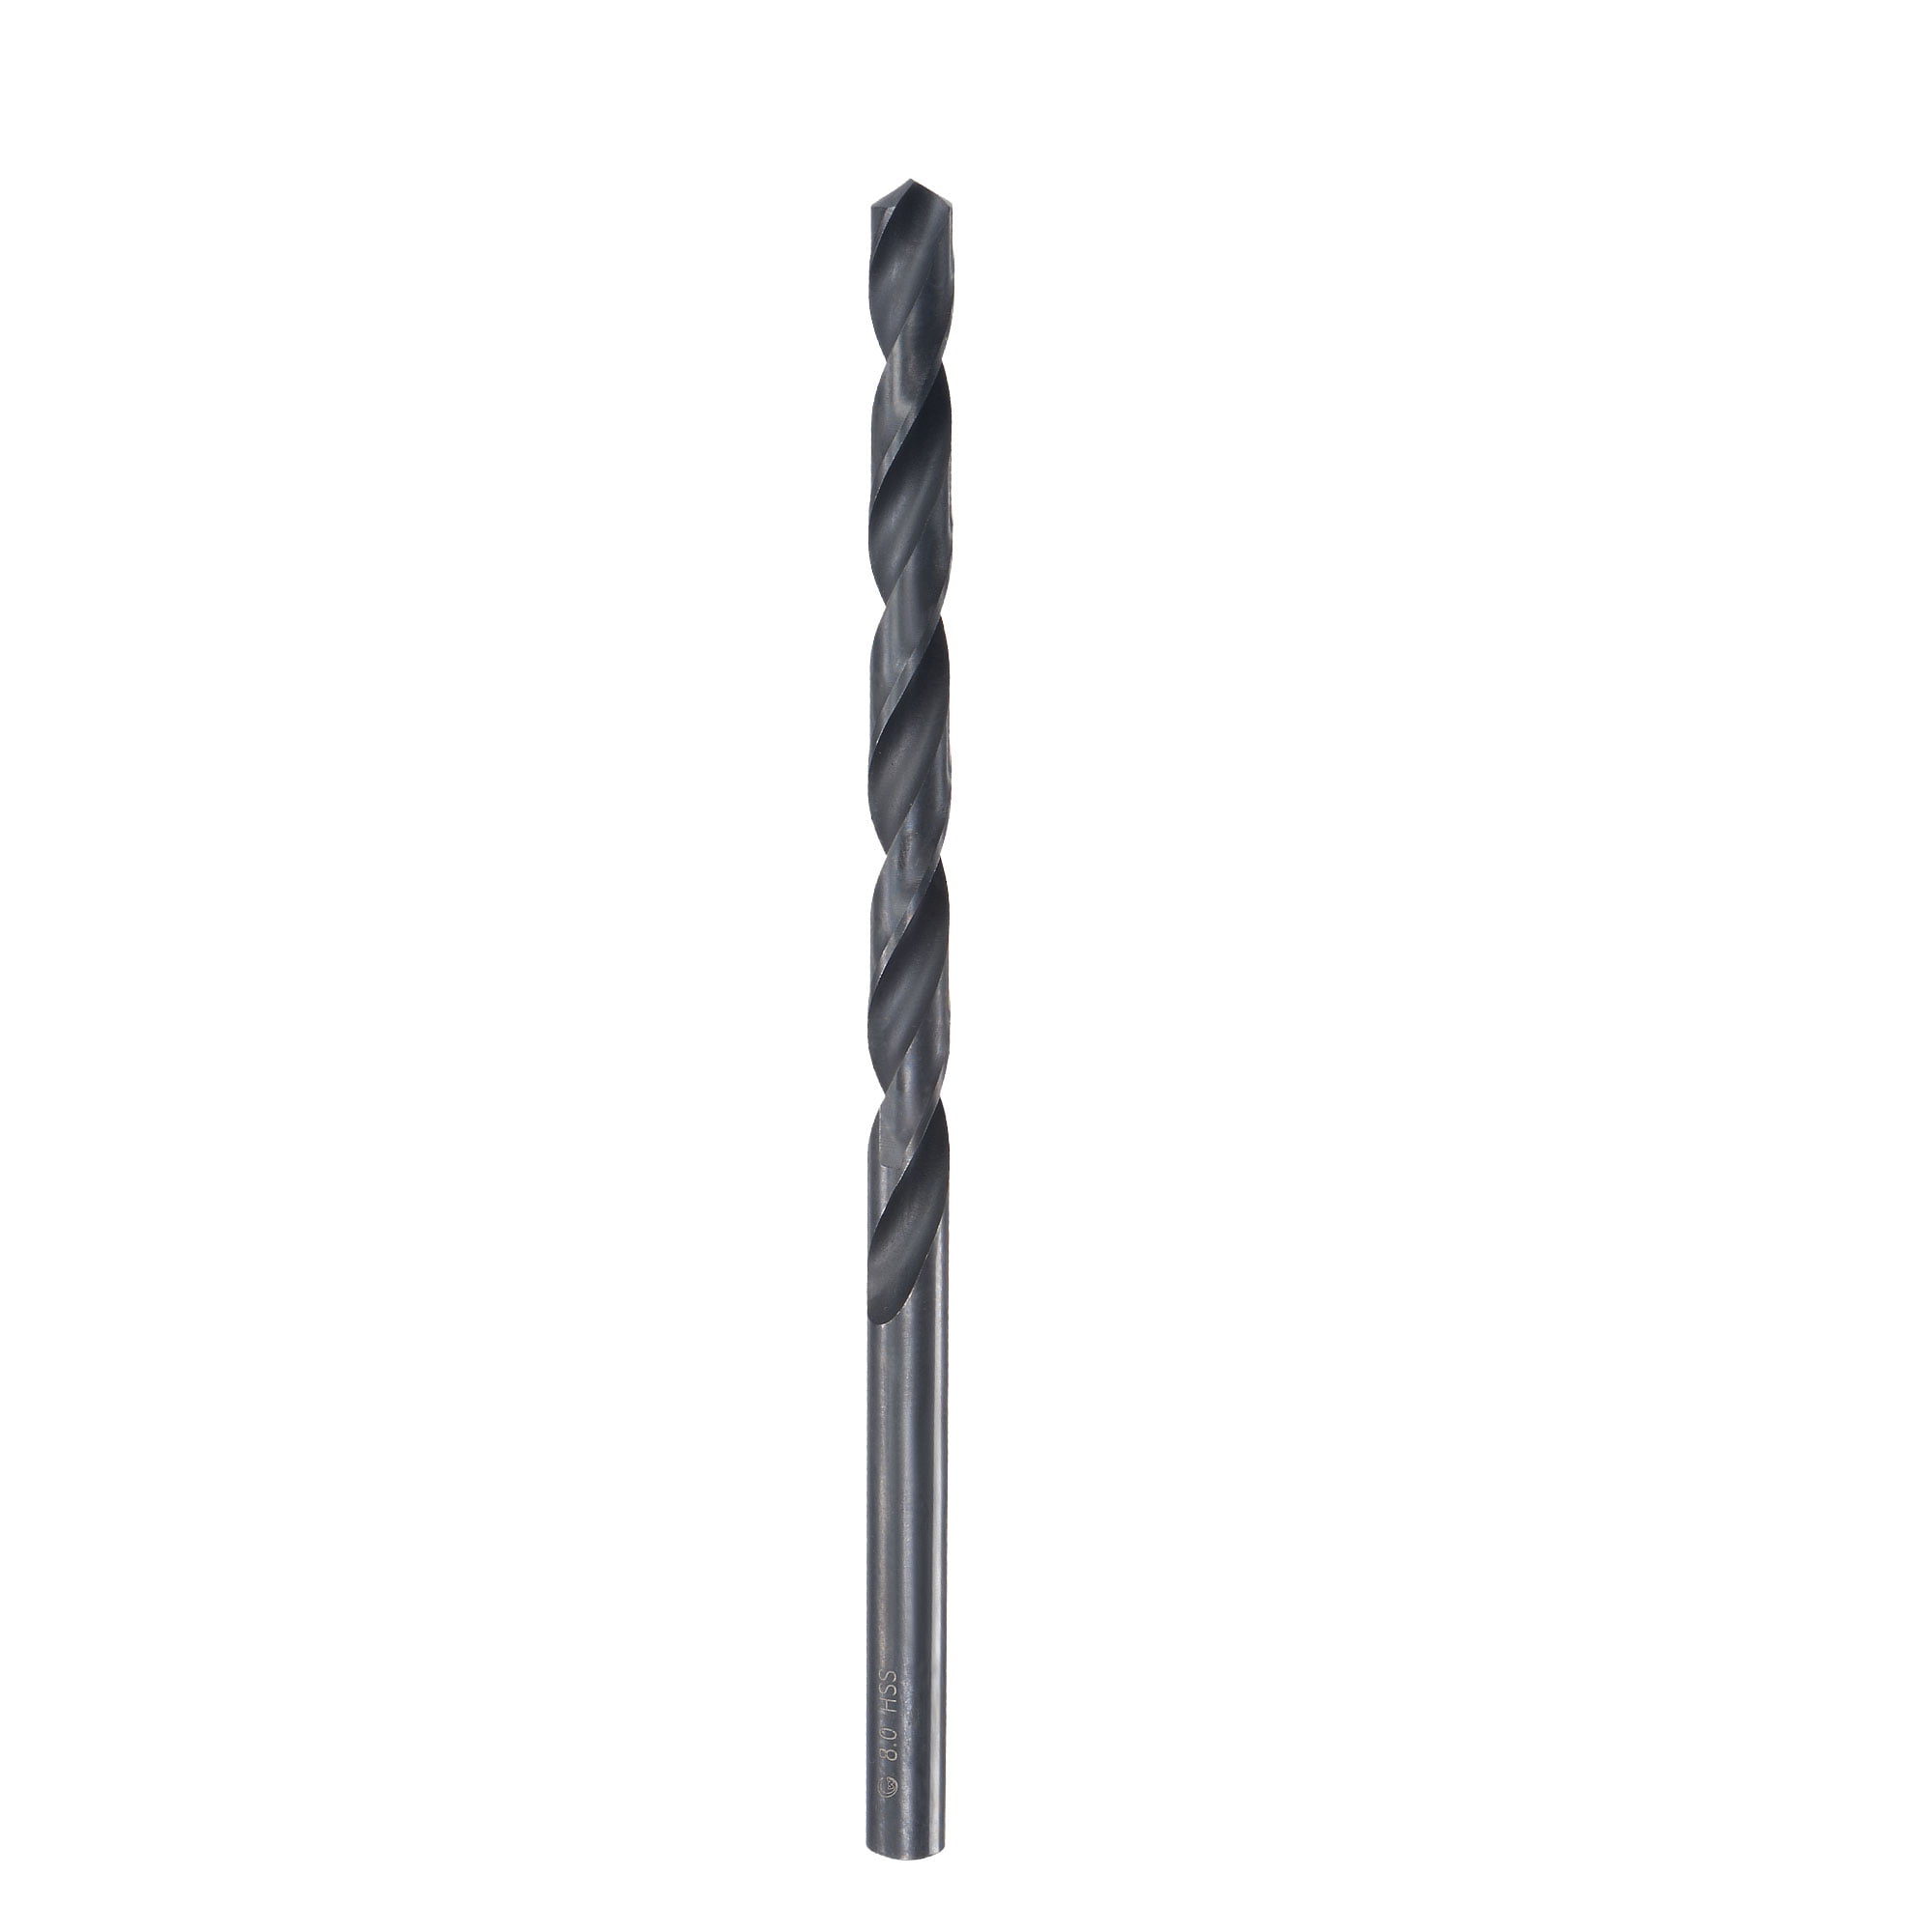 Wearable Steel Straight Shank CNC Machine Tool Lengthened Centering Drill for Home for Industry 